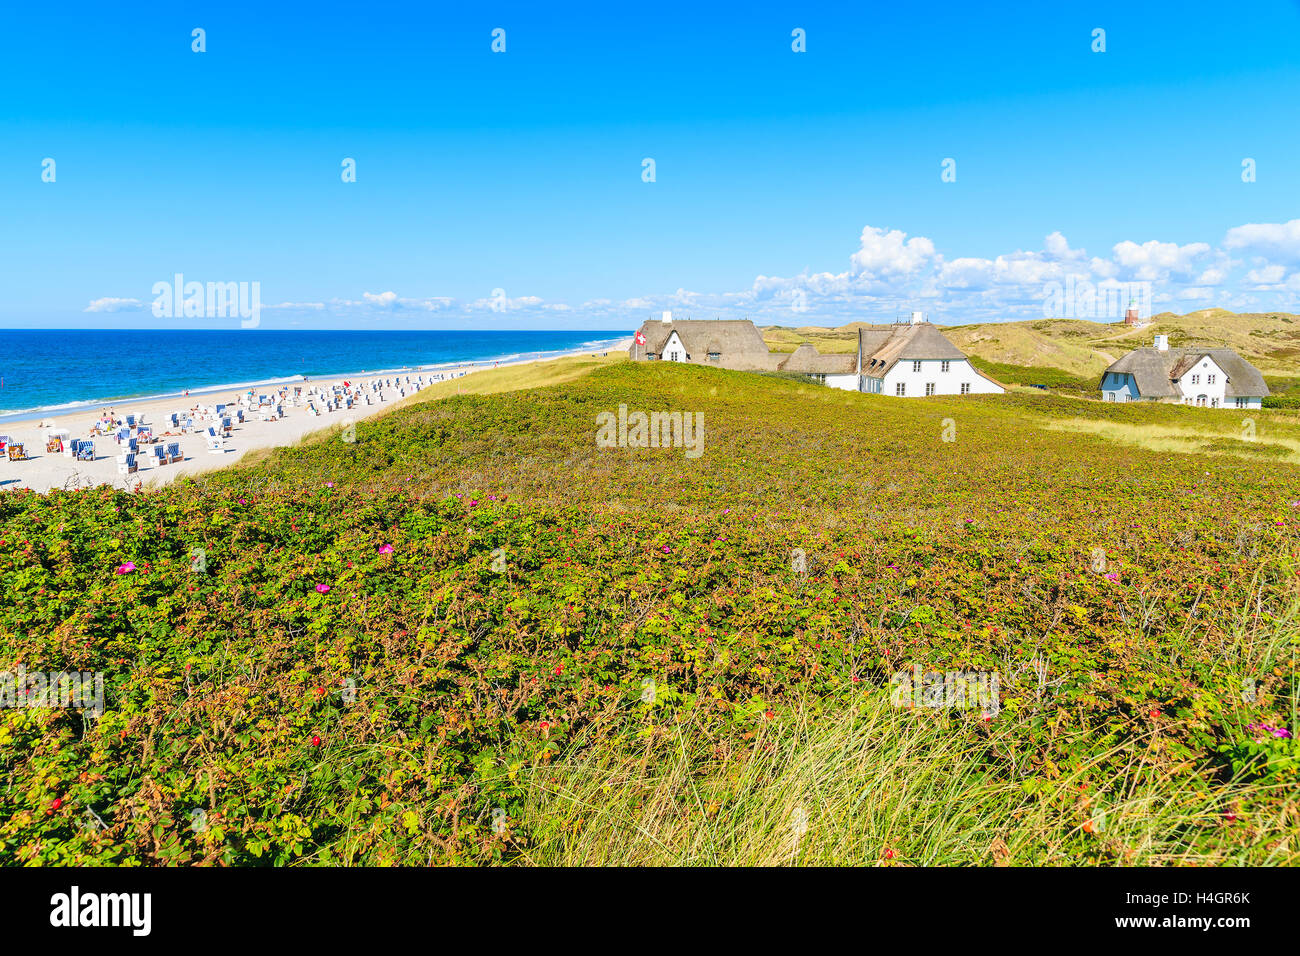 Typical Frisian houses with straw roofs on cliff at Kampen beach, Sylt island, Germany Stock Photo